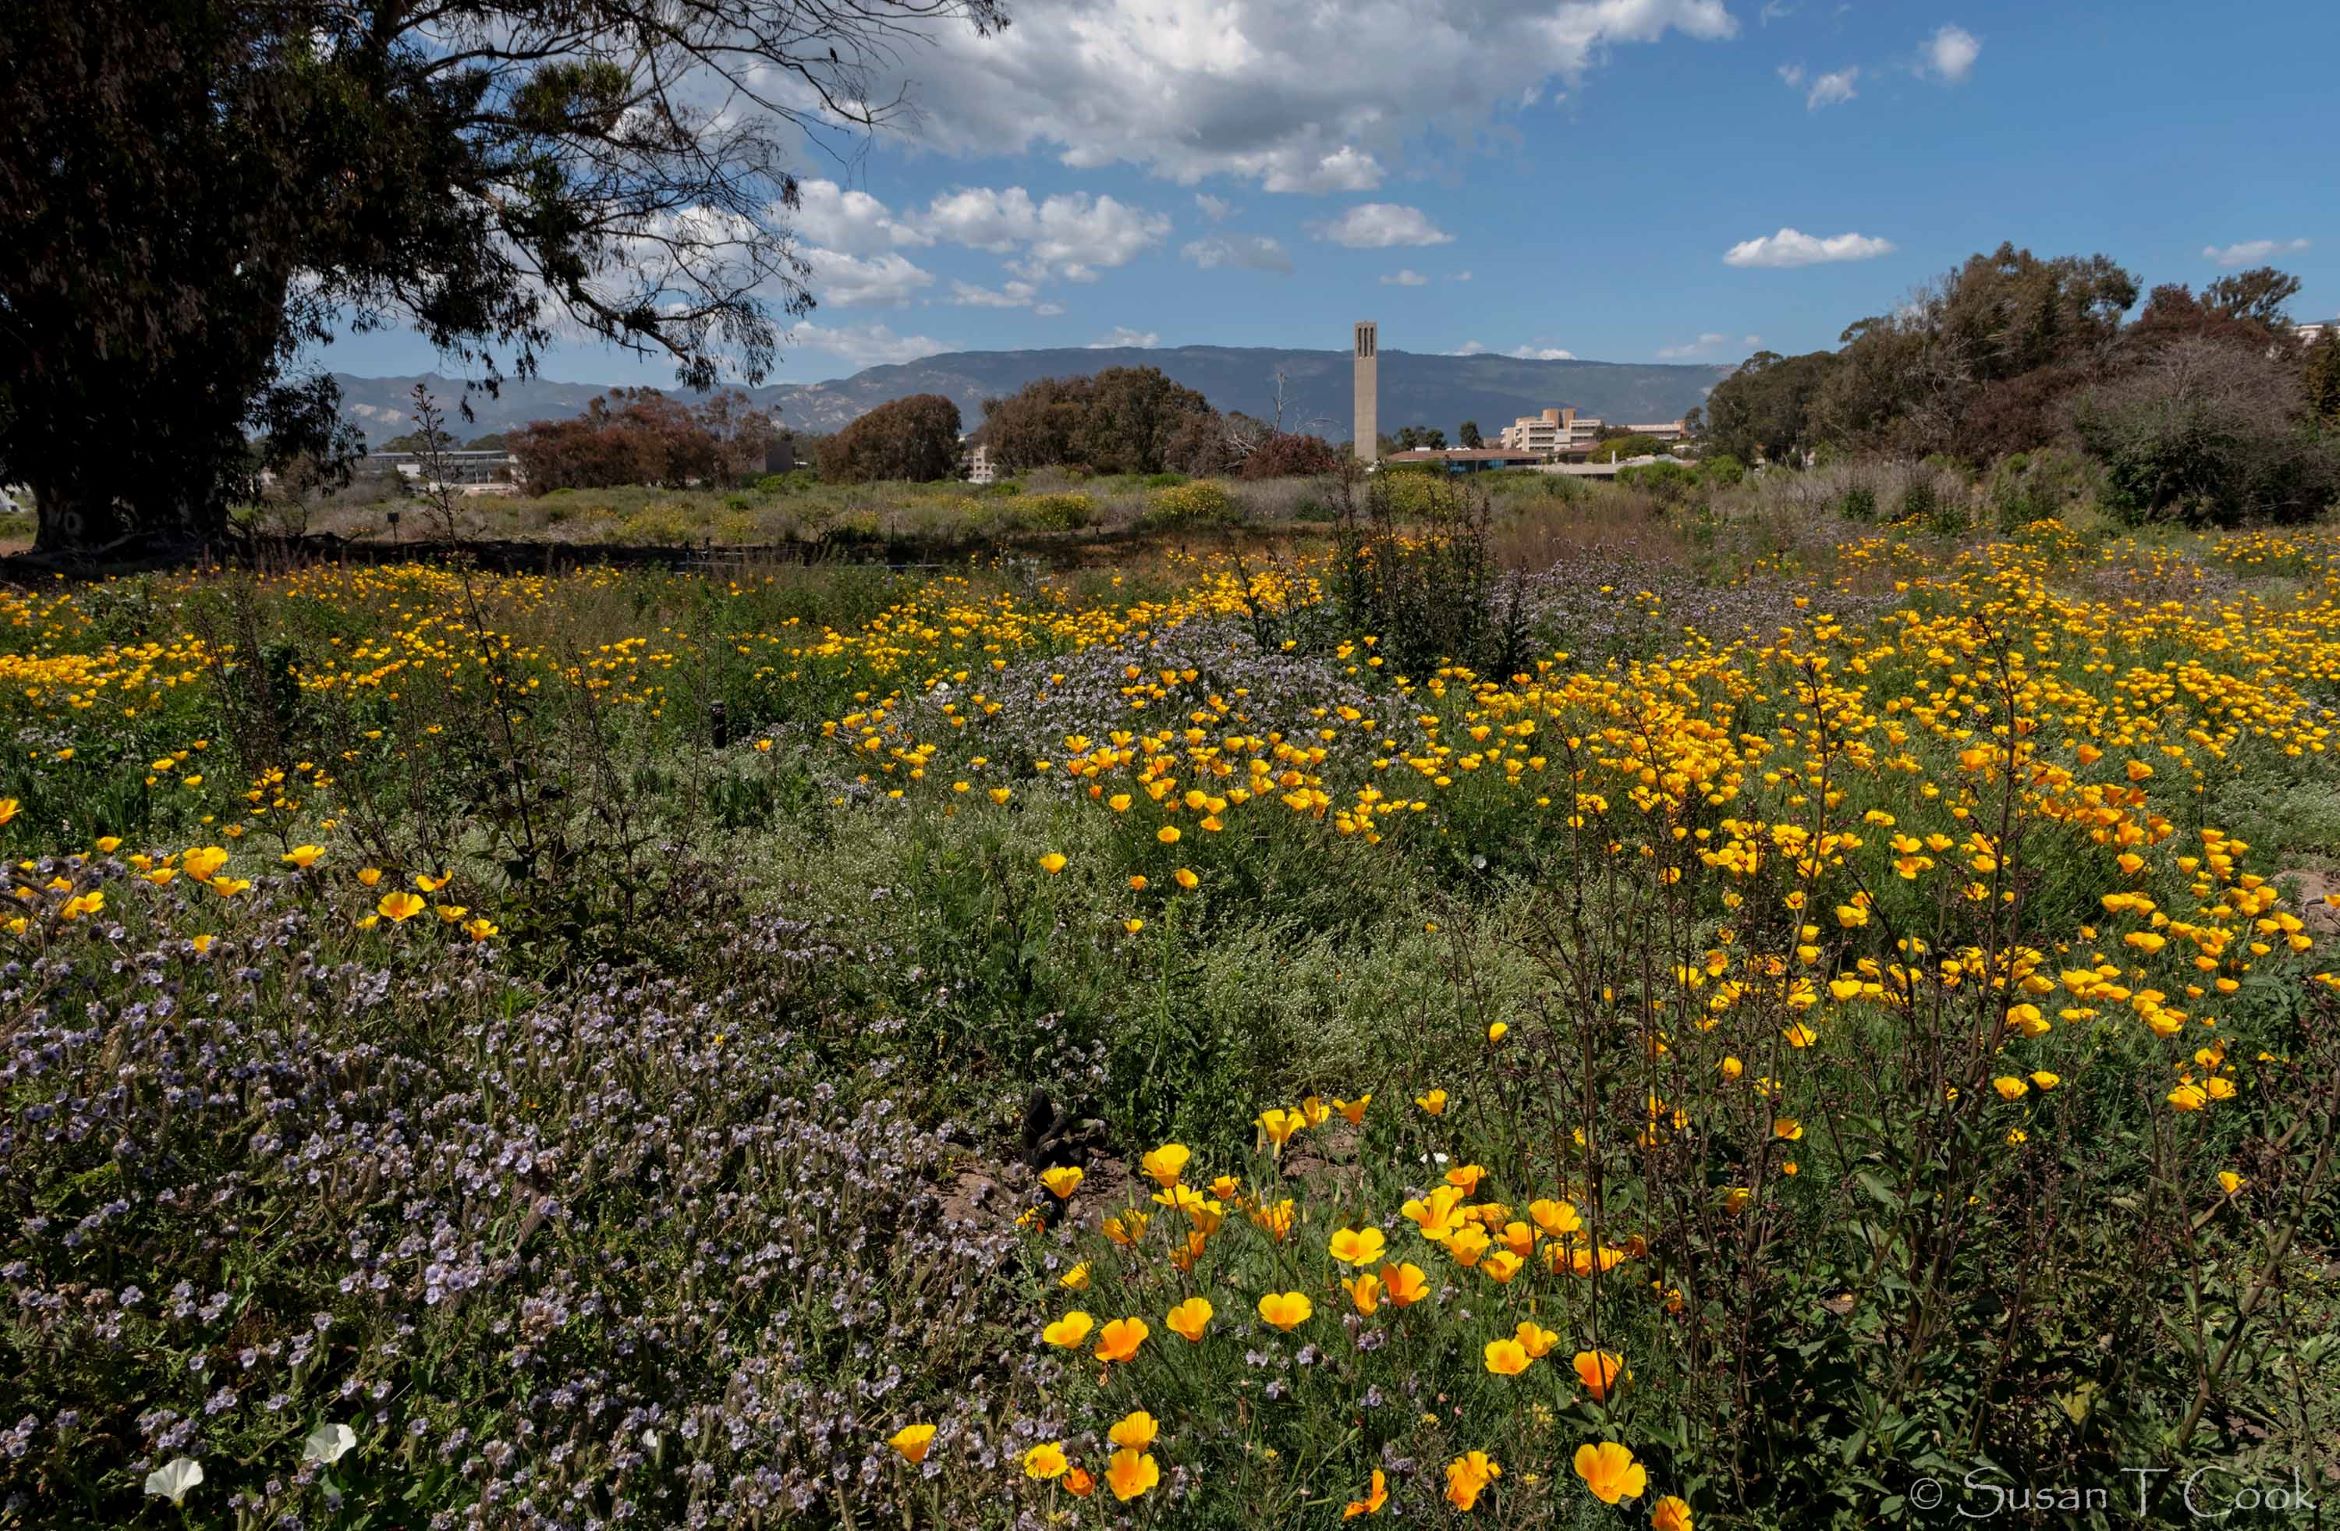 A view of the campus Lagoon with wildflowers blossoming and storke tower in the distance